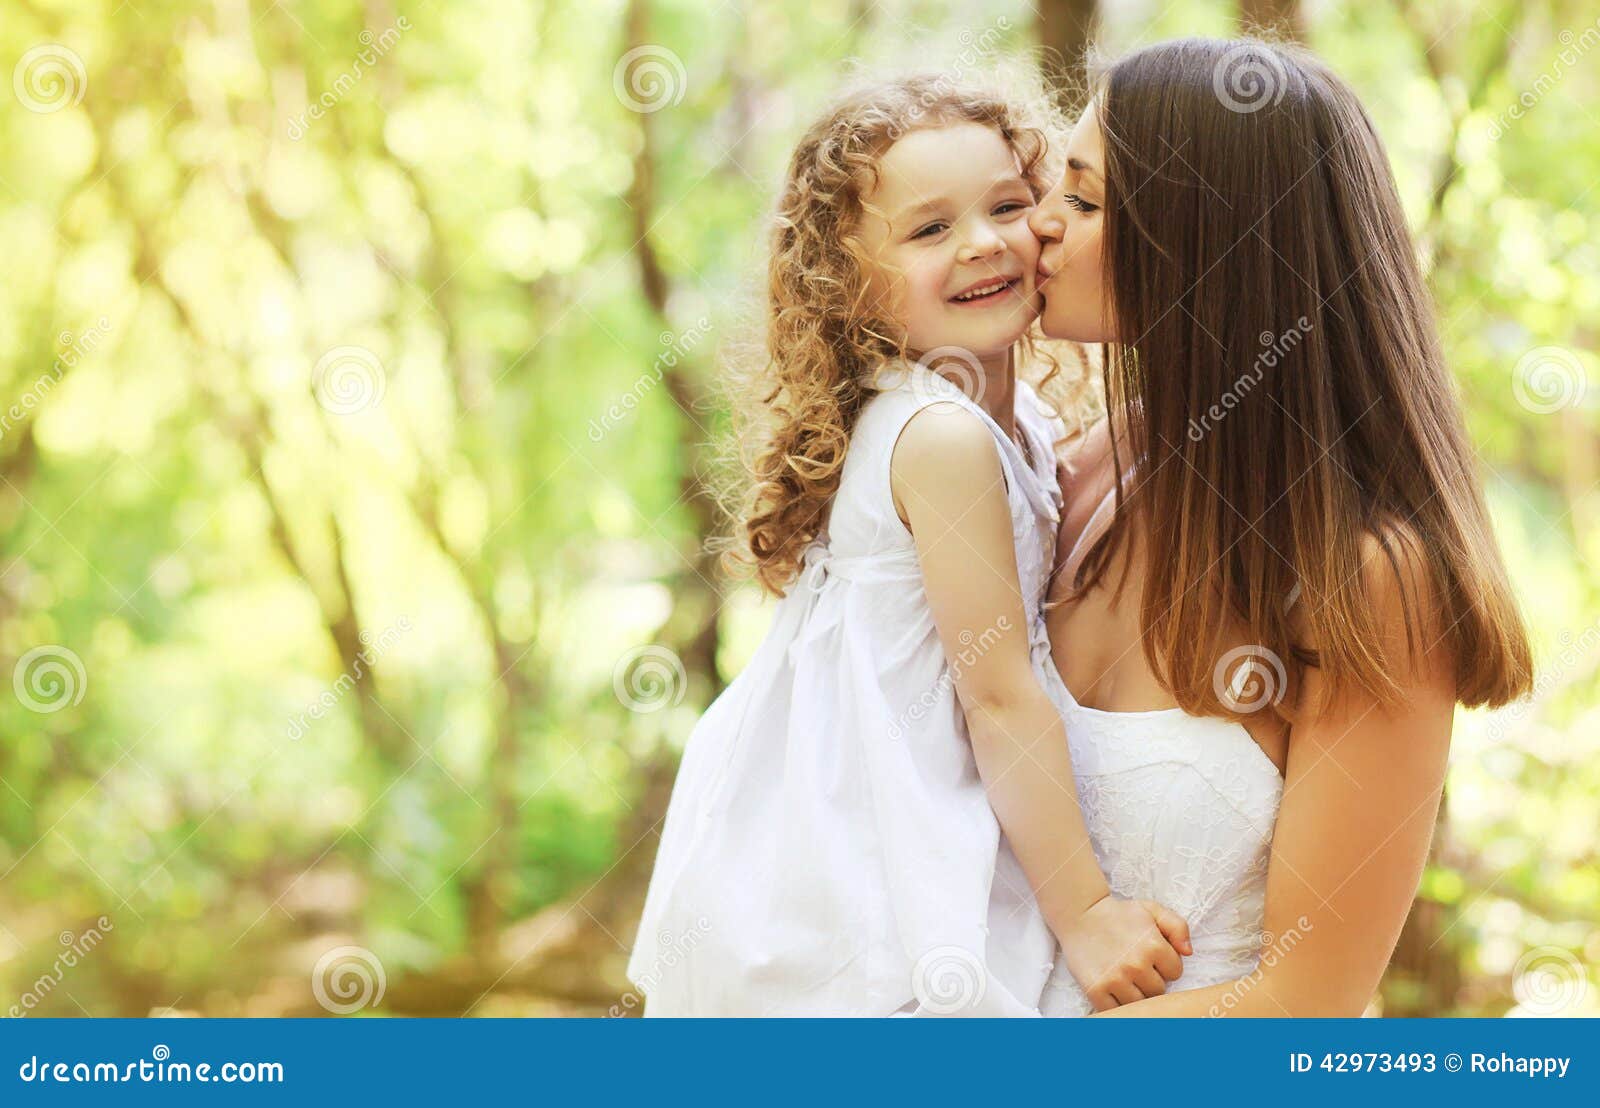 Happy Mother Kissing Daughter Walking On The Park Stock Image Image 